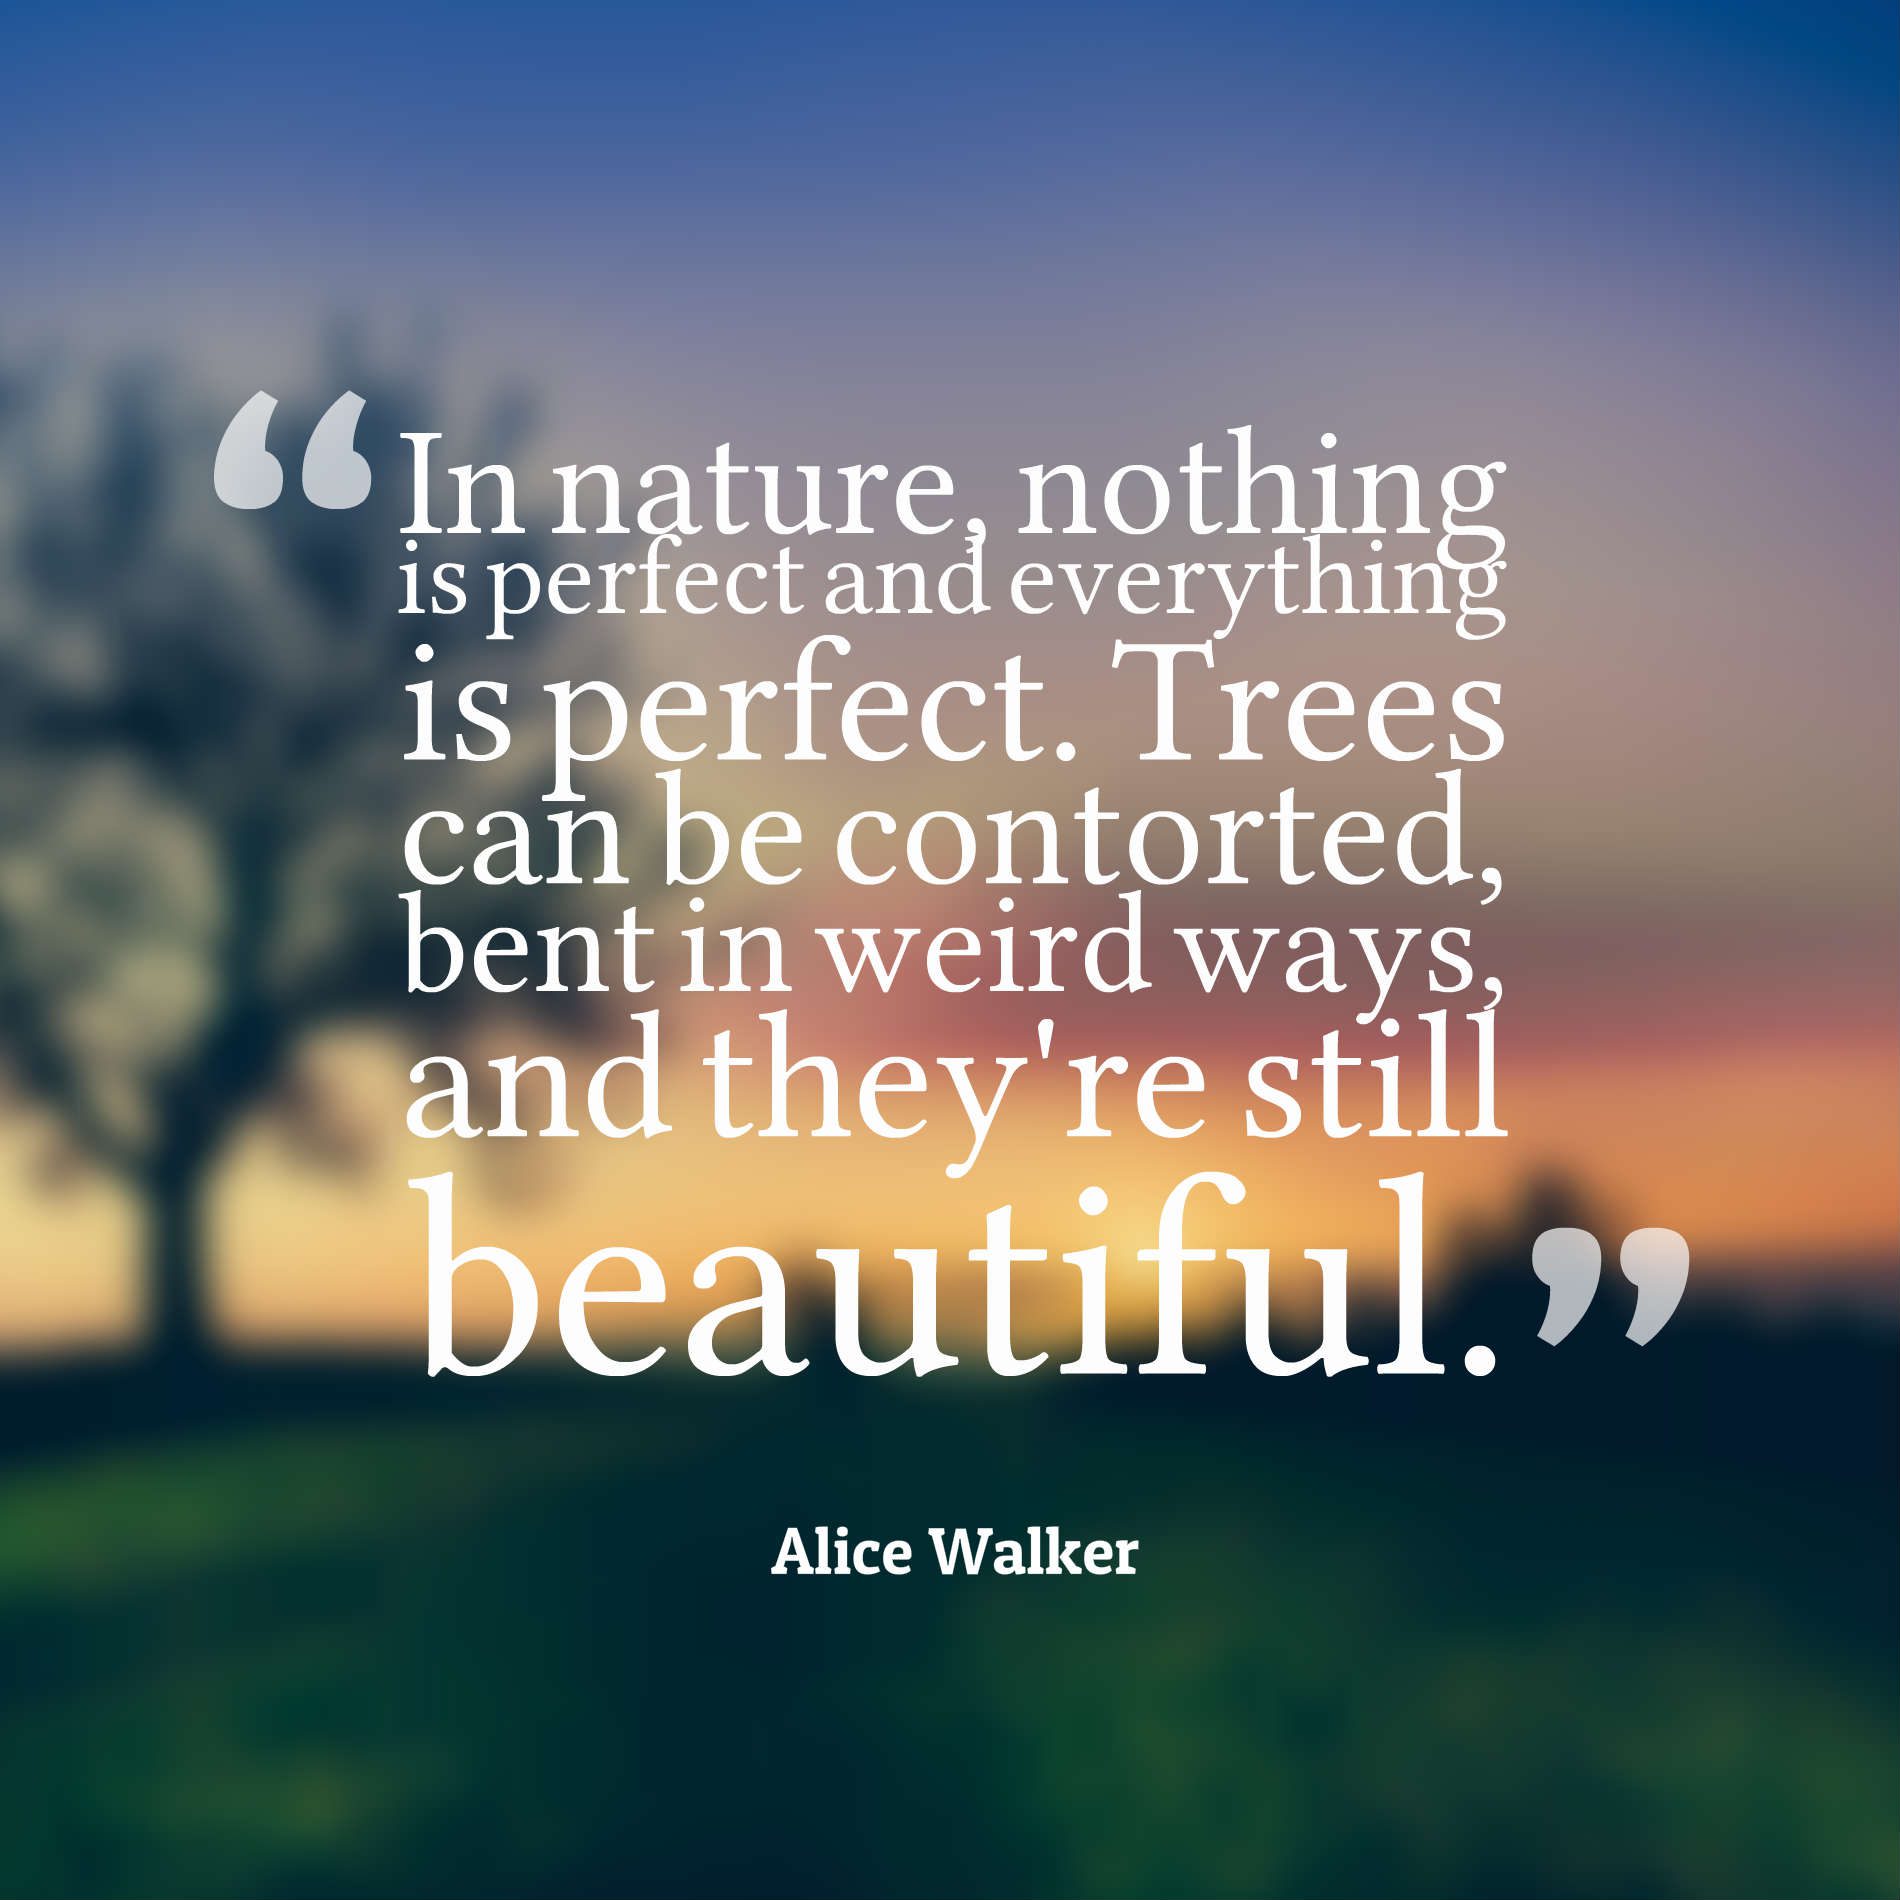 In nature, nothing is perfect and everything is perfect.